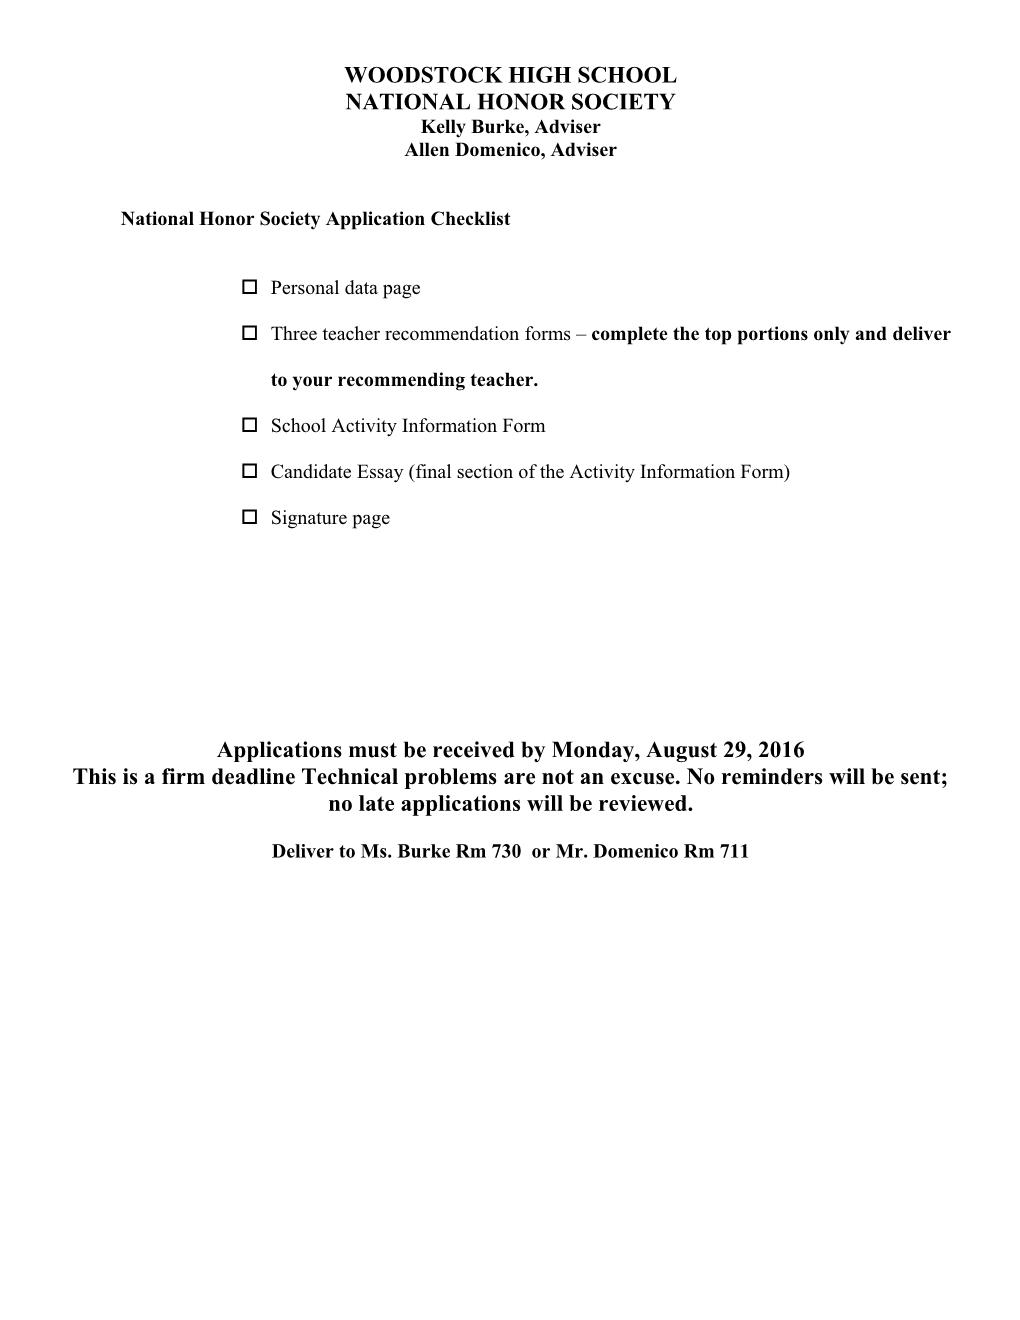 Student Activity Information Form